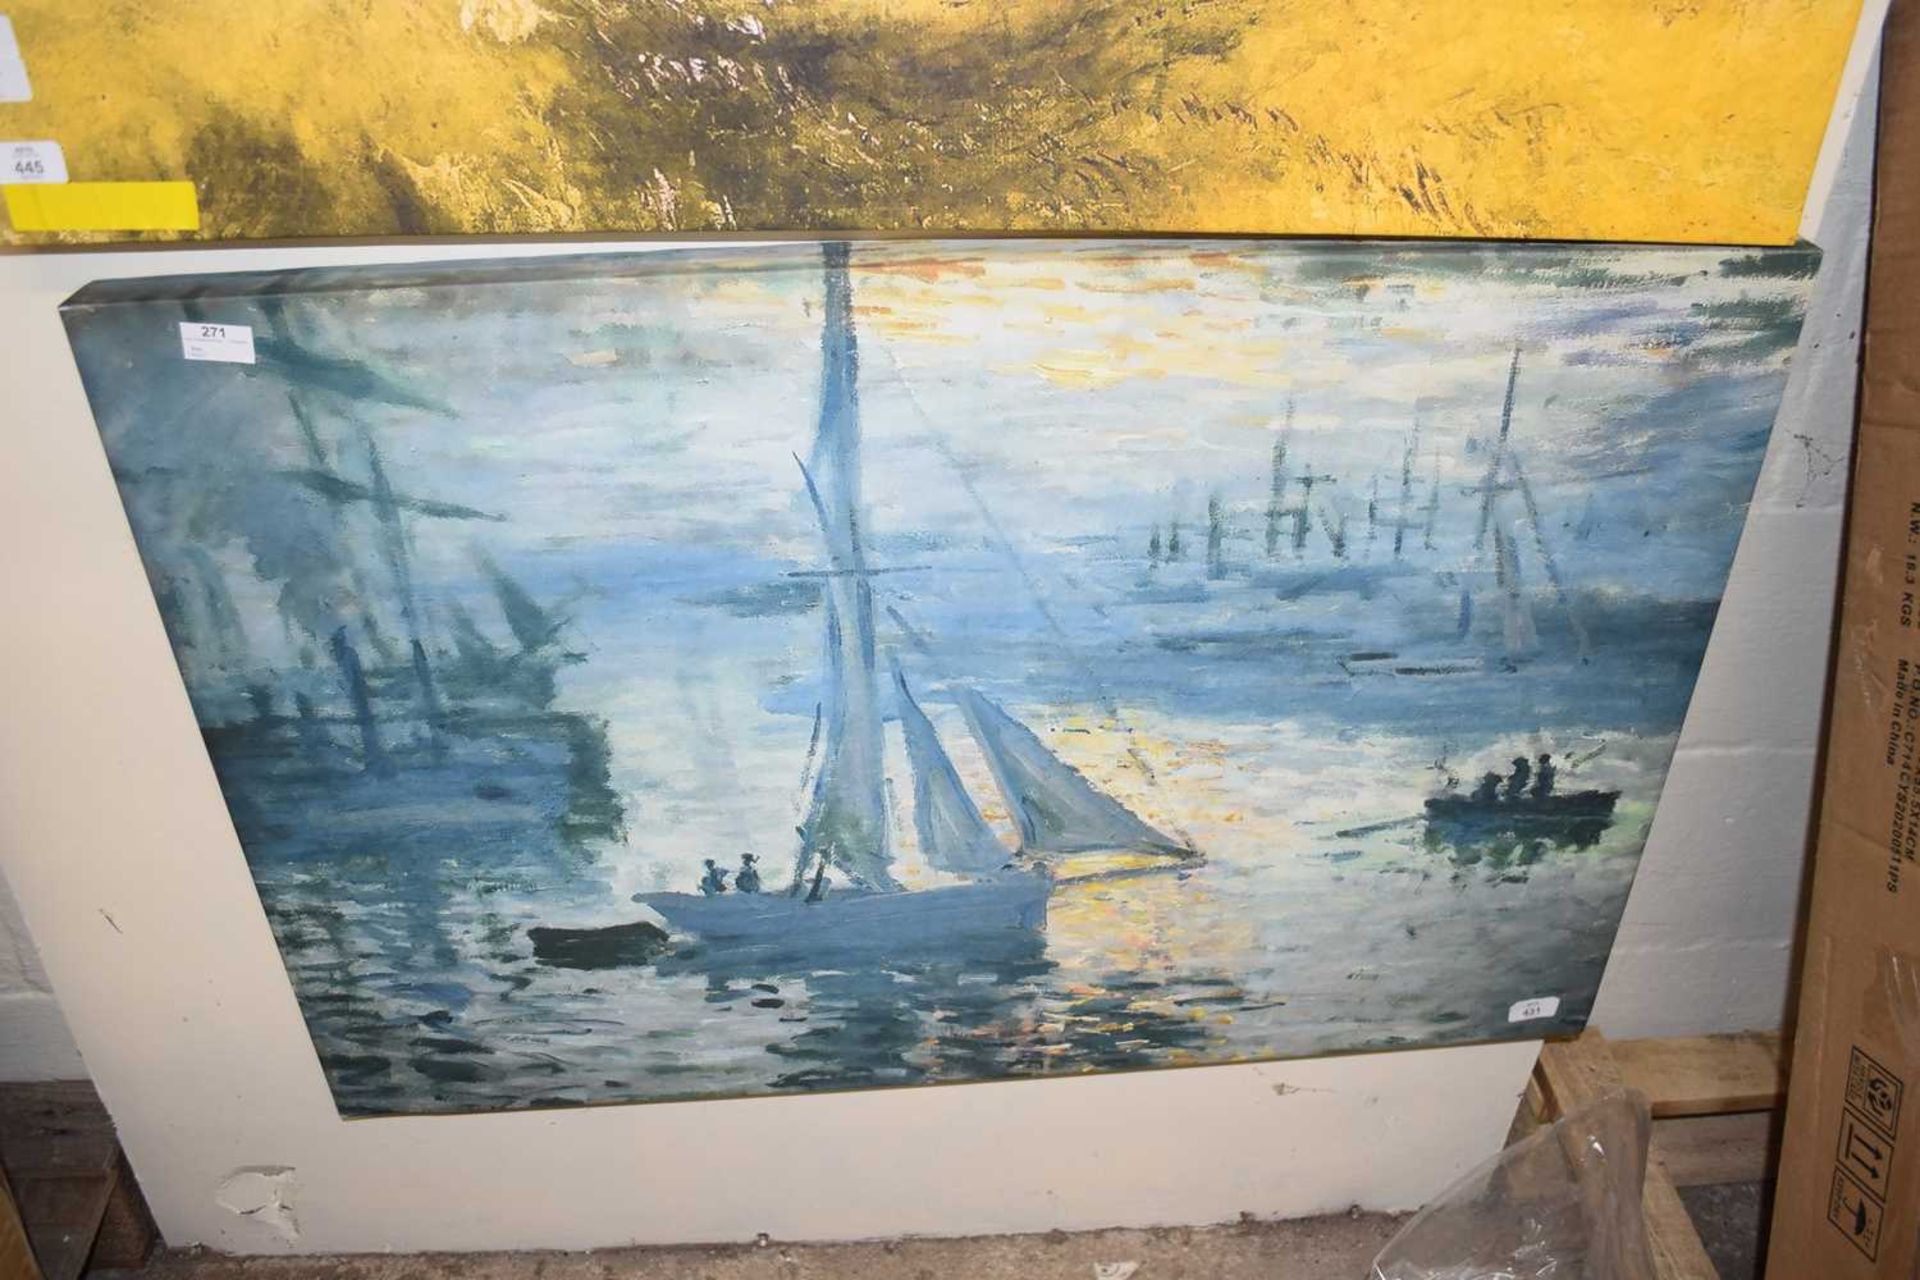 Print of boats on water, canvas, 100 x 65cm